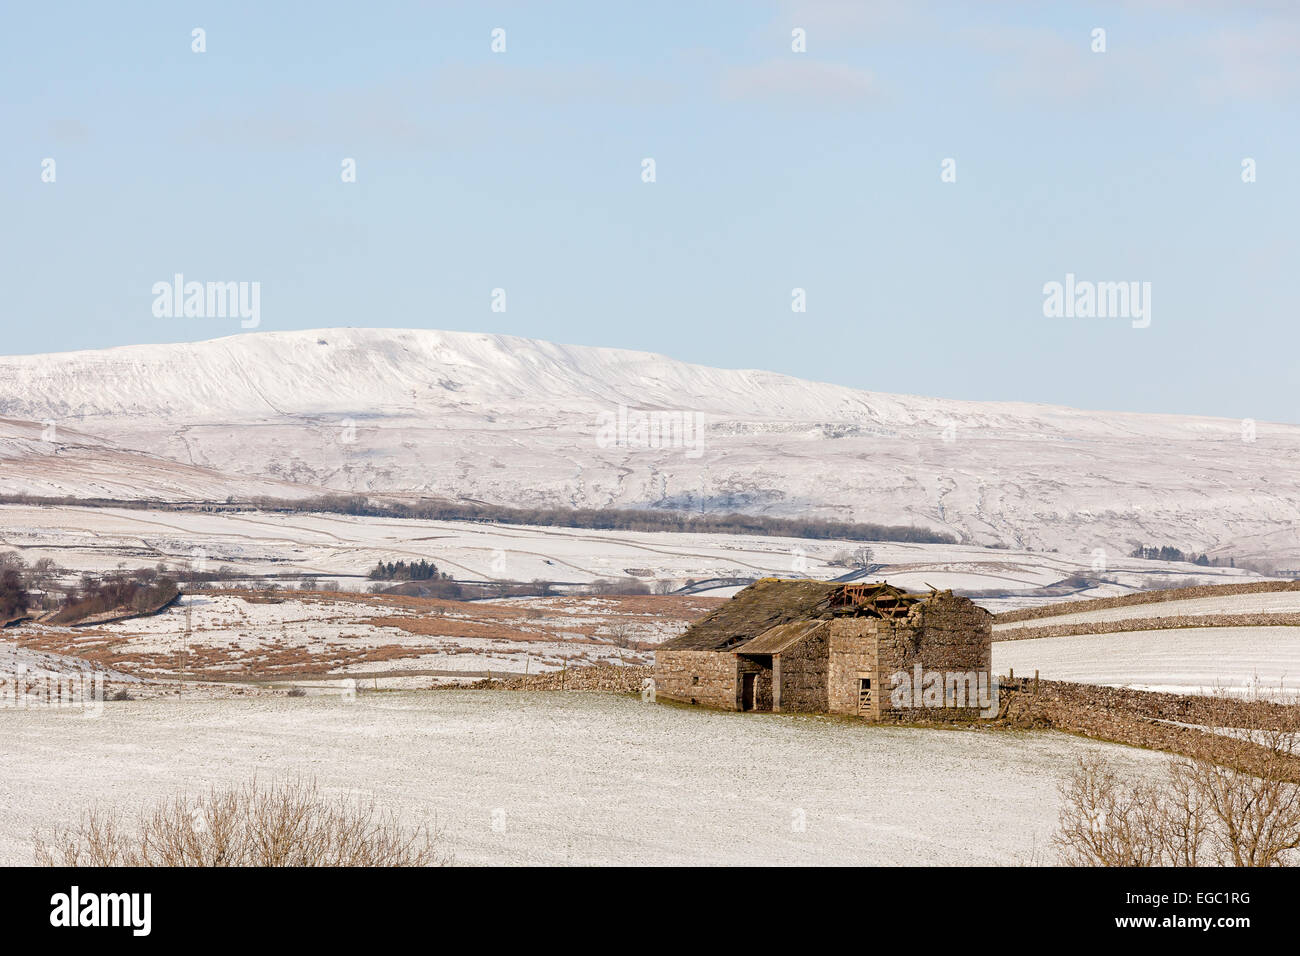 The view from Ribblesdale to Whernside in the Yorkshire Dales on a snow covered winter's day. Stock Photo